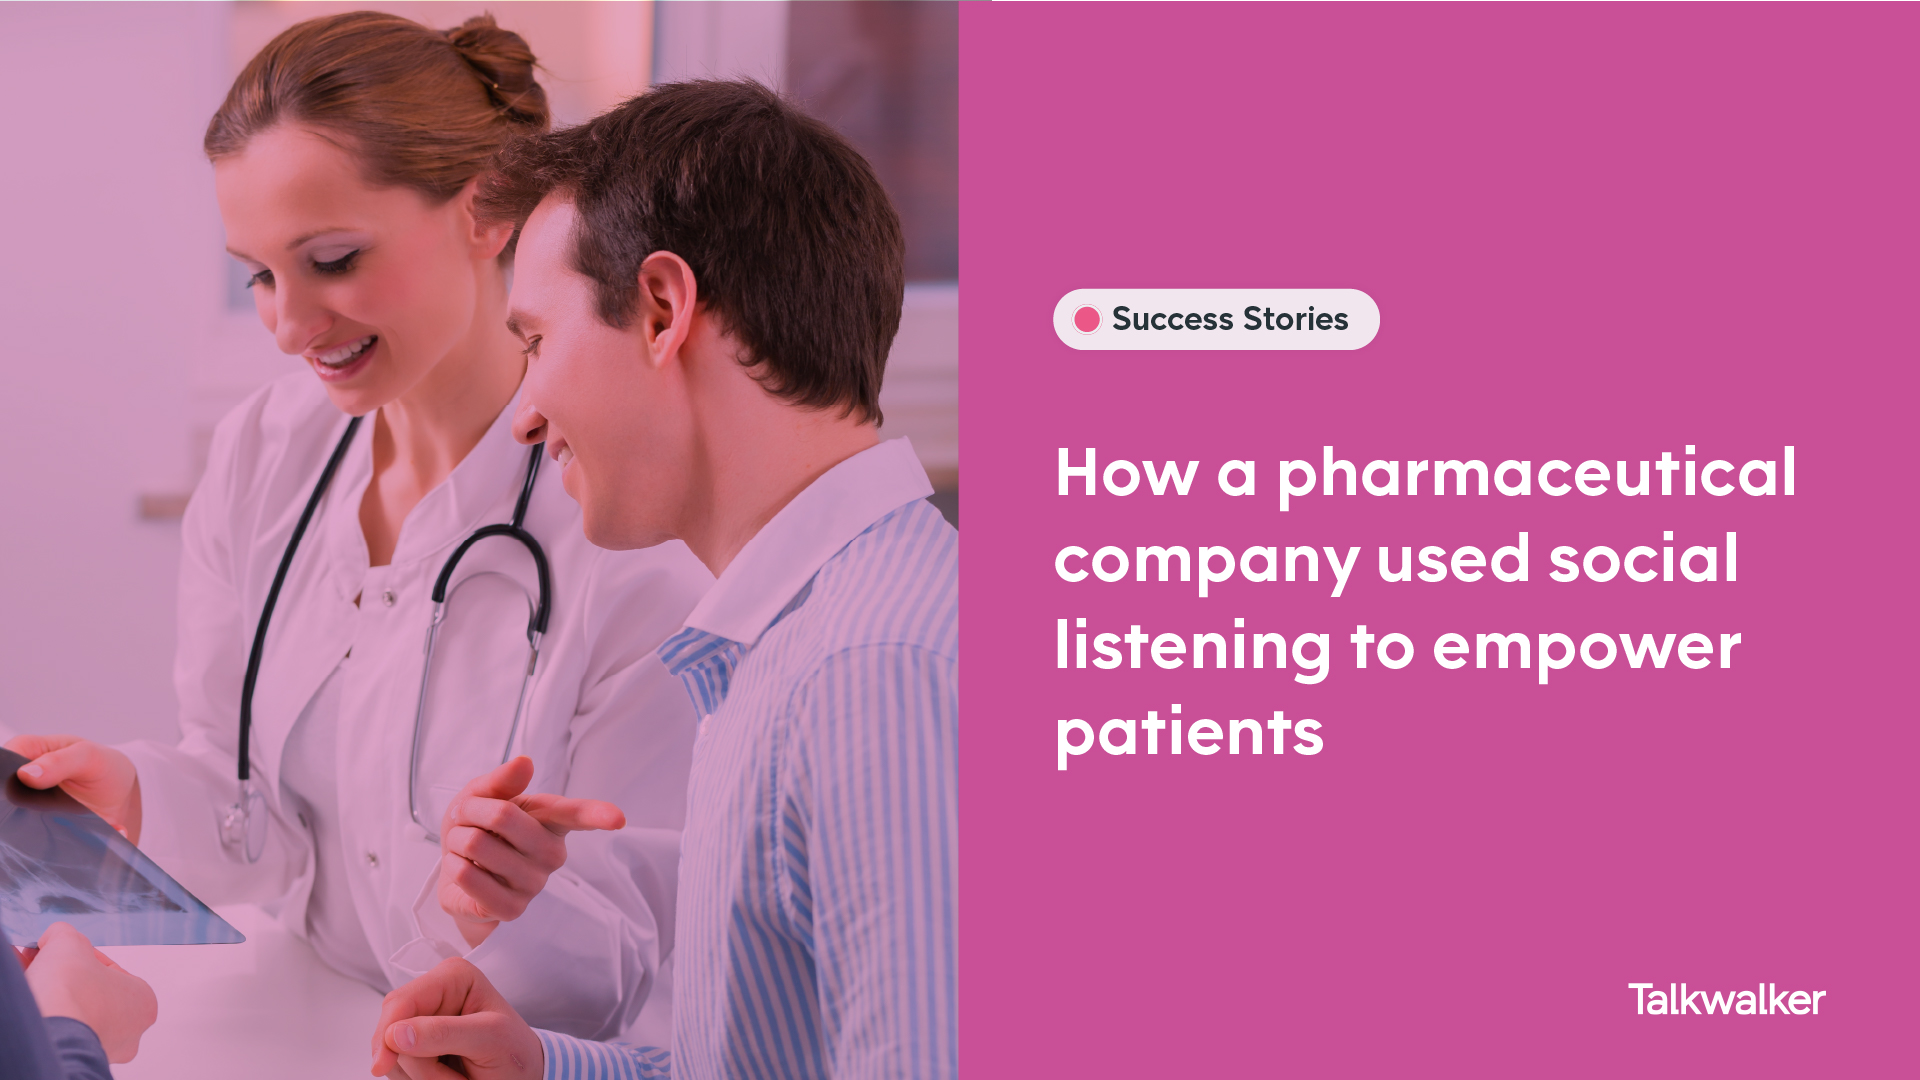 How a pharmaceutical company used social listening to empower patients